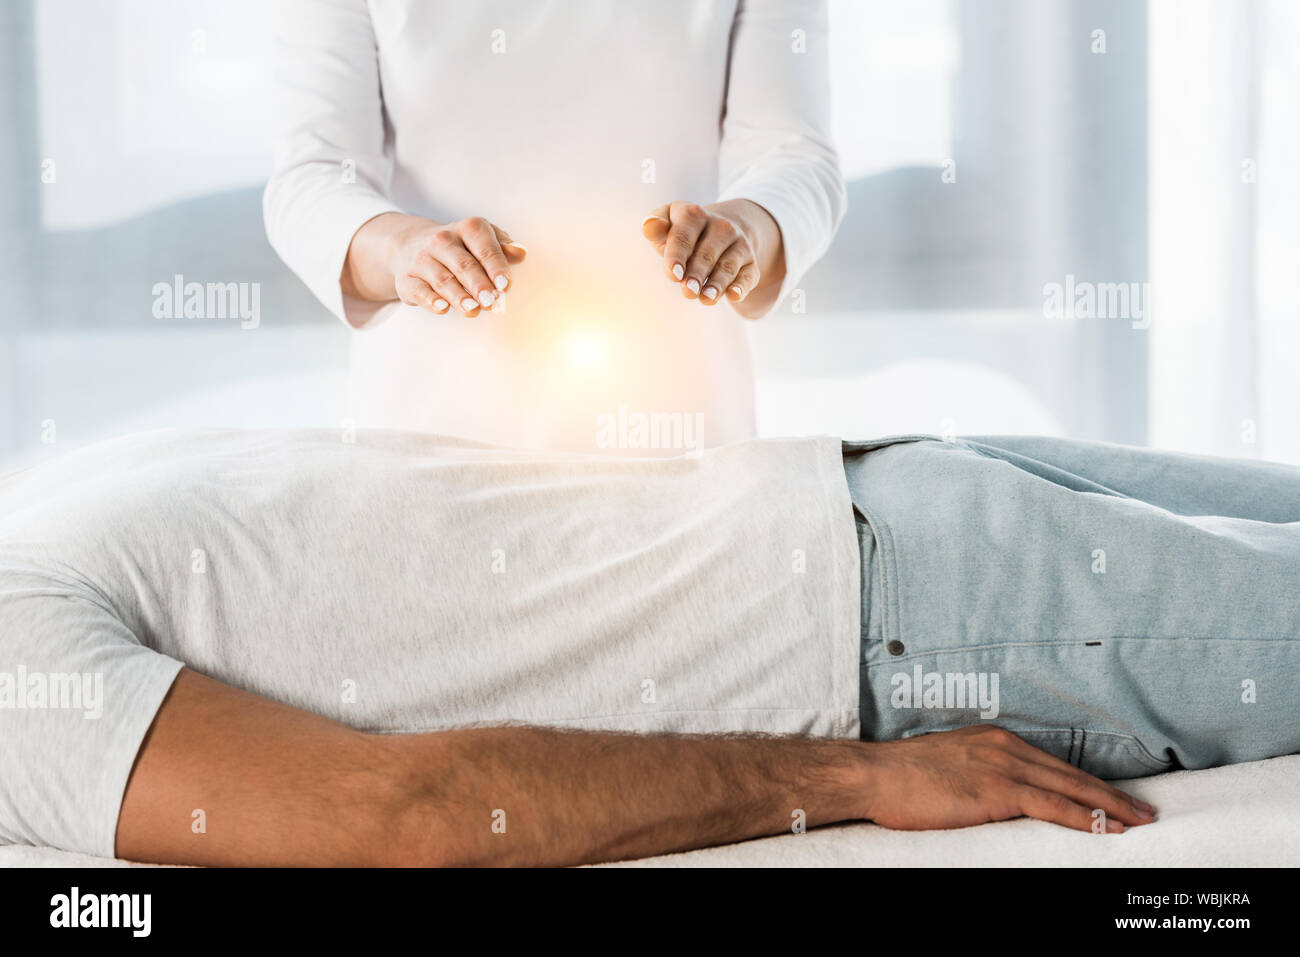 cropped view of woman putting hands above body while healing man Stock Photo